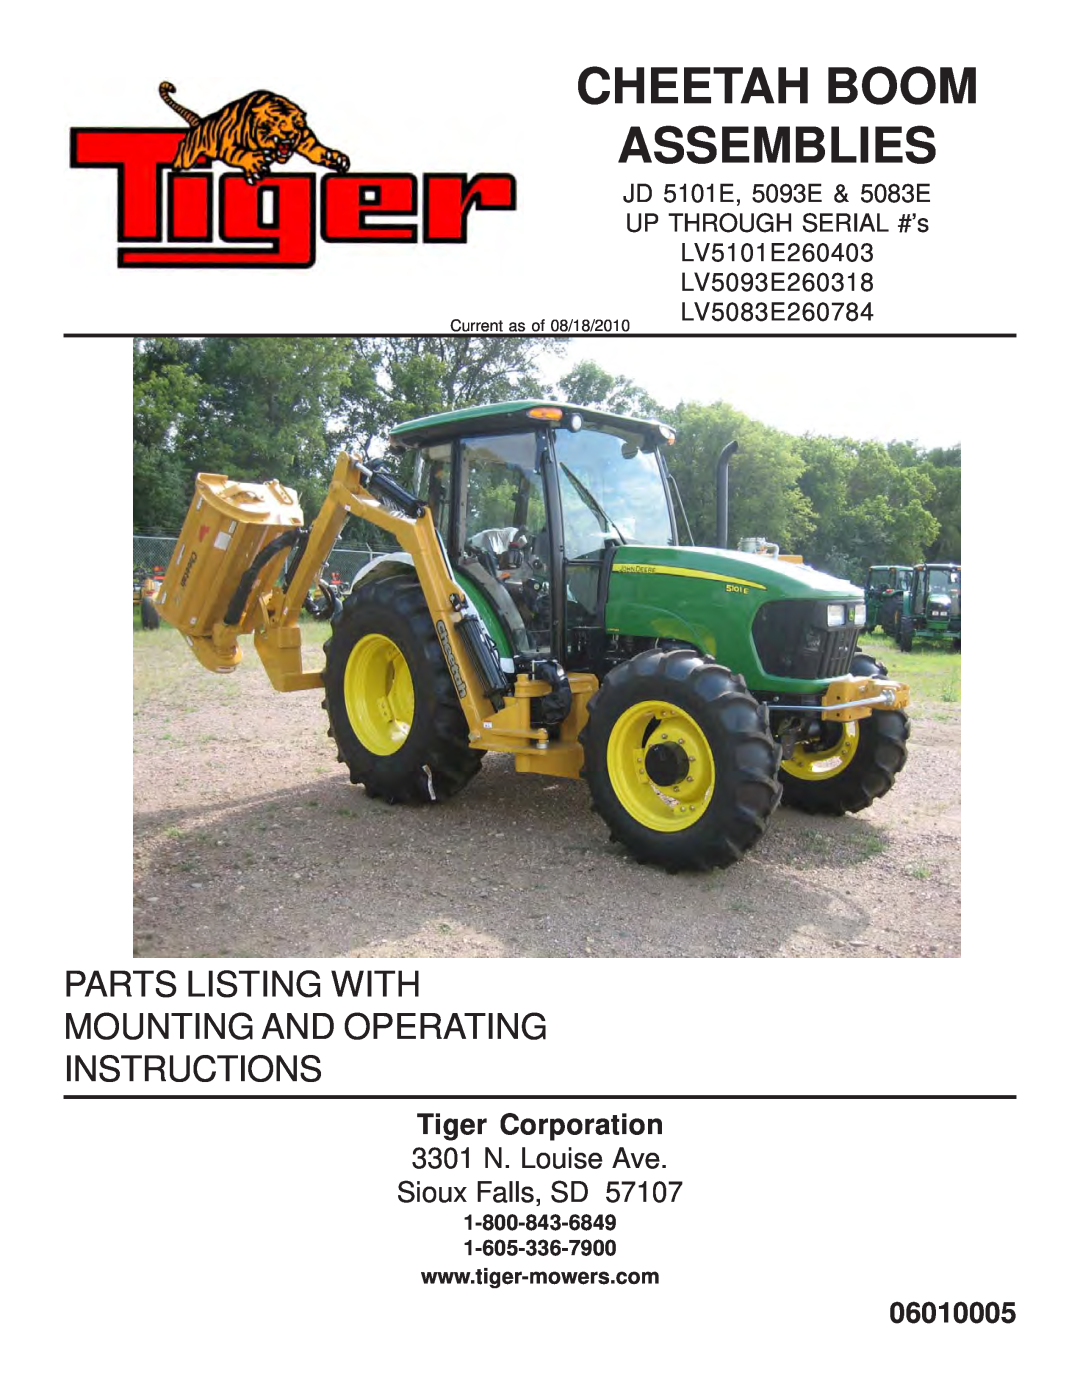 Tiger Products Co., Ltd JD 5083E, JD 5101E, JD 5093E manual Tiger Corporation, 3301 N. Louise Ave Sioux Falls, SD, 06010005 